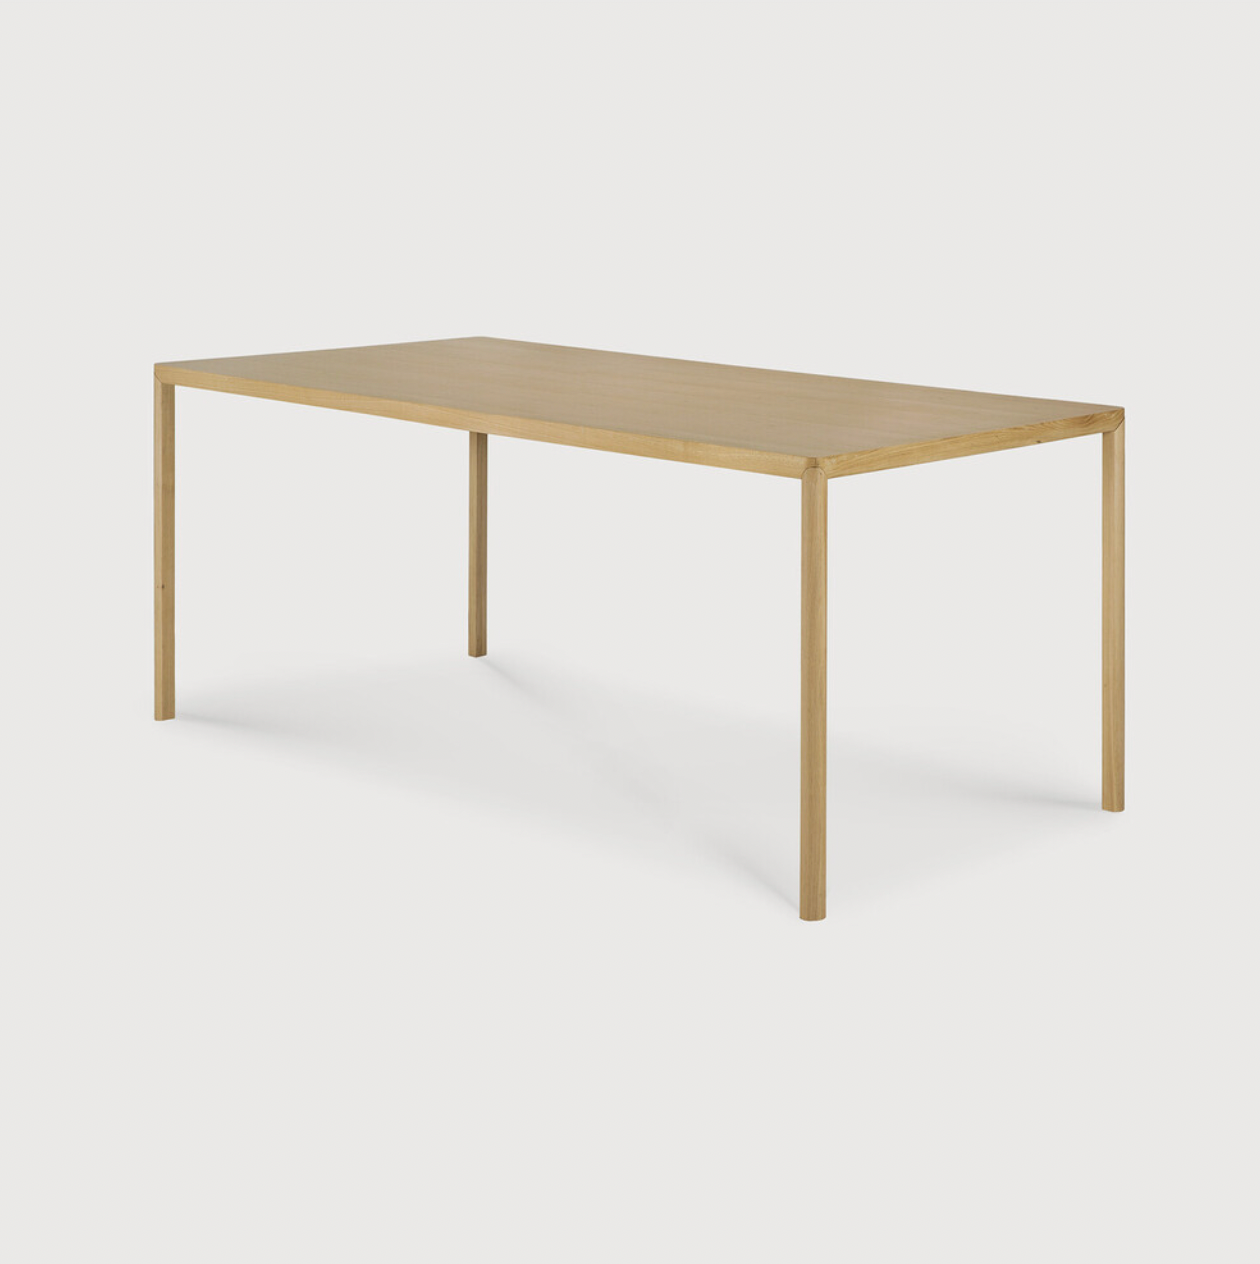 With a simple, clean and minimal design, this Oak Air Dining Table is a table to add your dining room or kitchen area of years to come. The sleek bevelled legs makes the tabletop seems to float effortlessly above.   Material: Oak, 100% Solid Wood Finish: Varnished